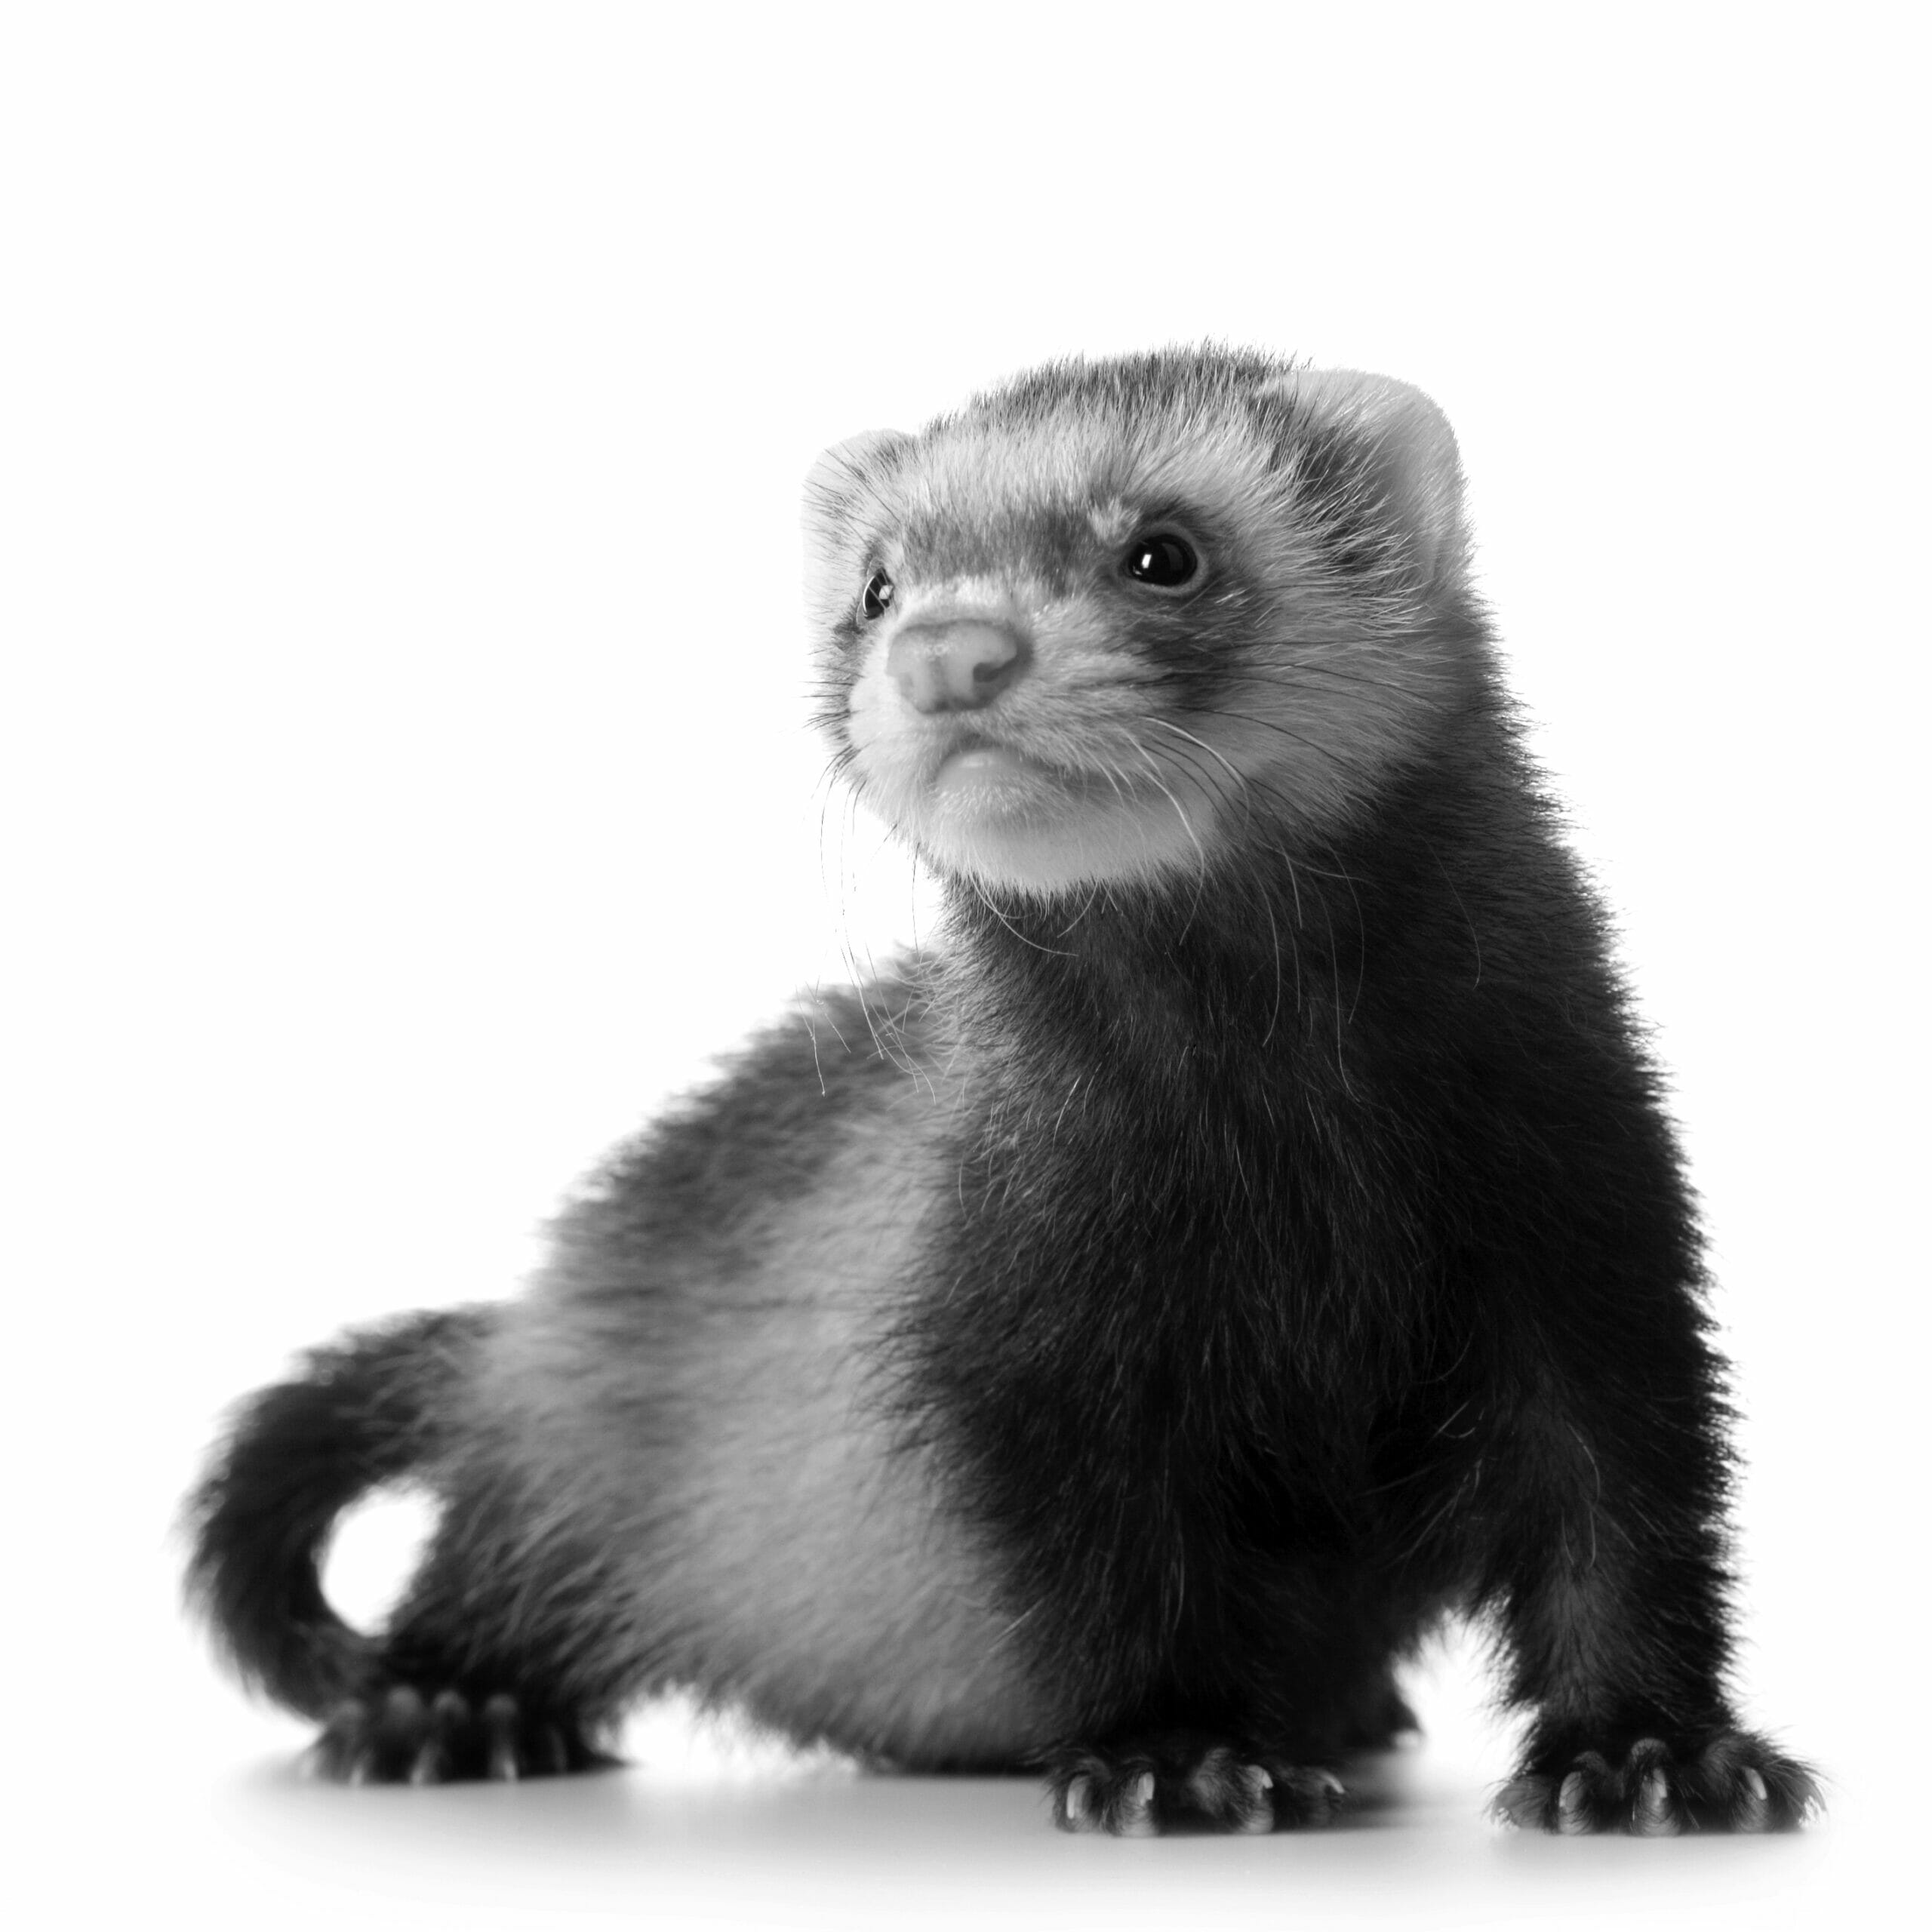 Ferret Information and Care Recommendations